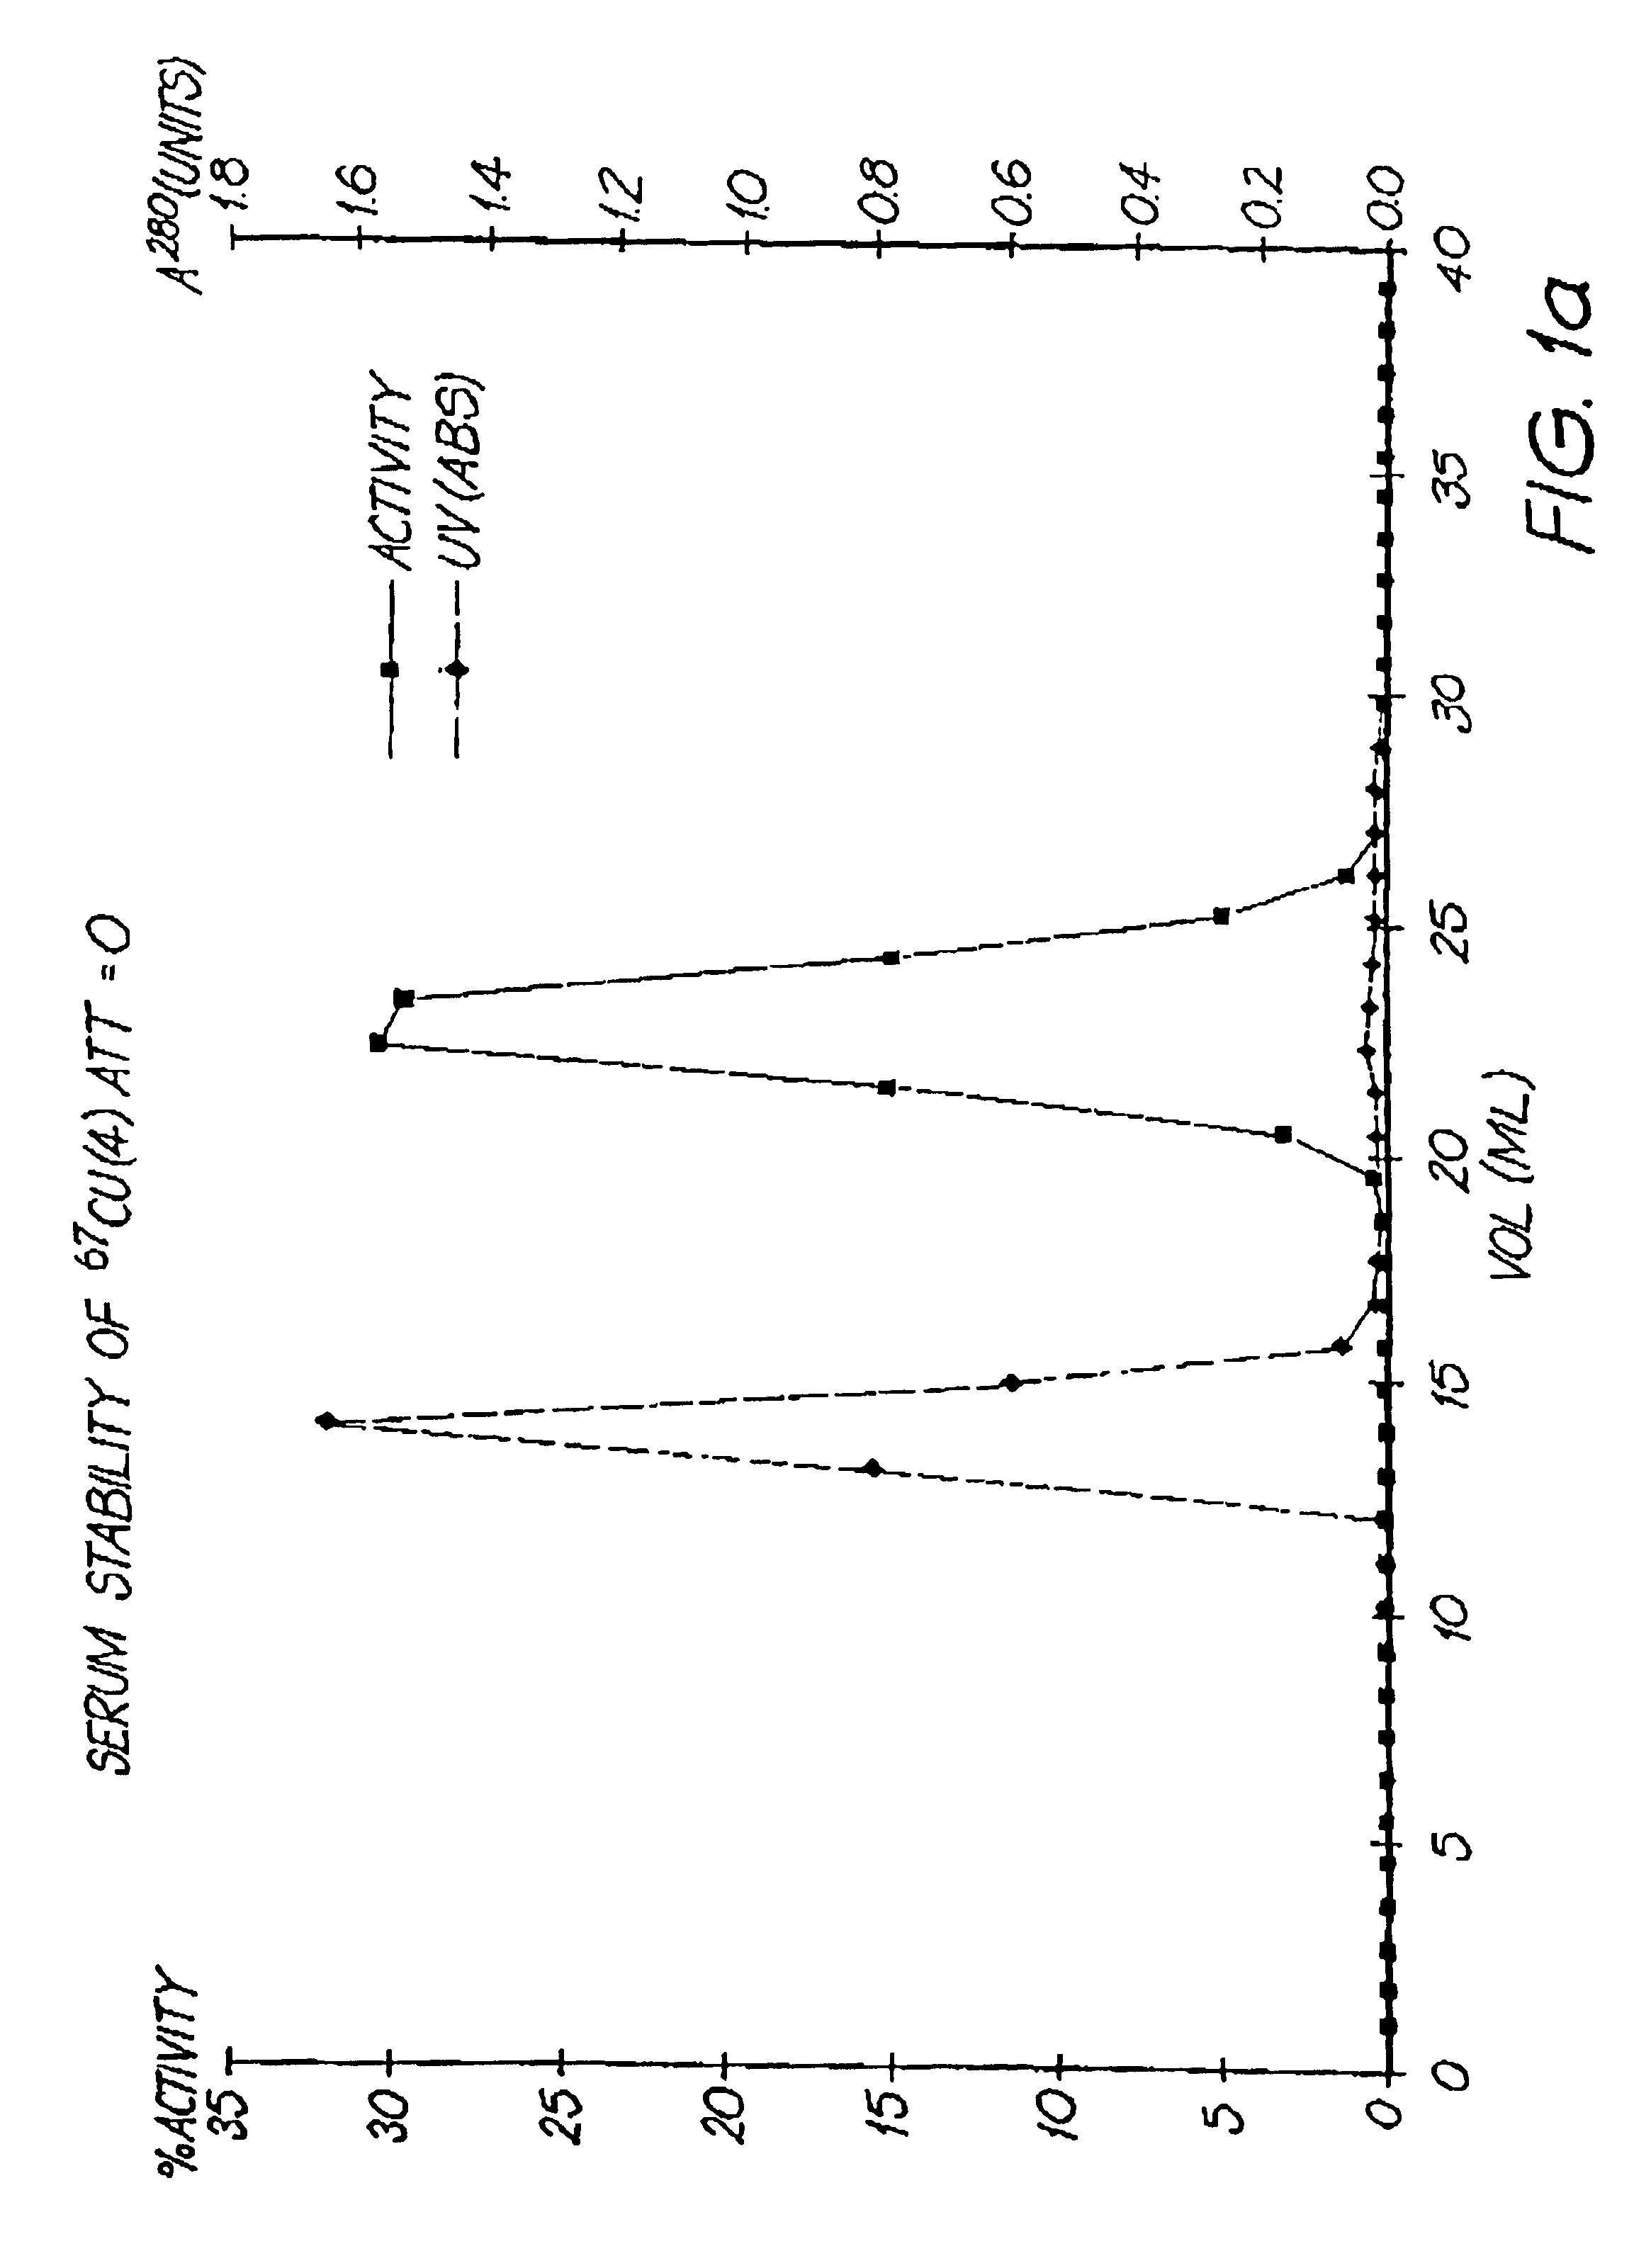 Cryptate compounds and methods for diagnosis and therapy